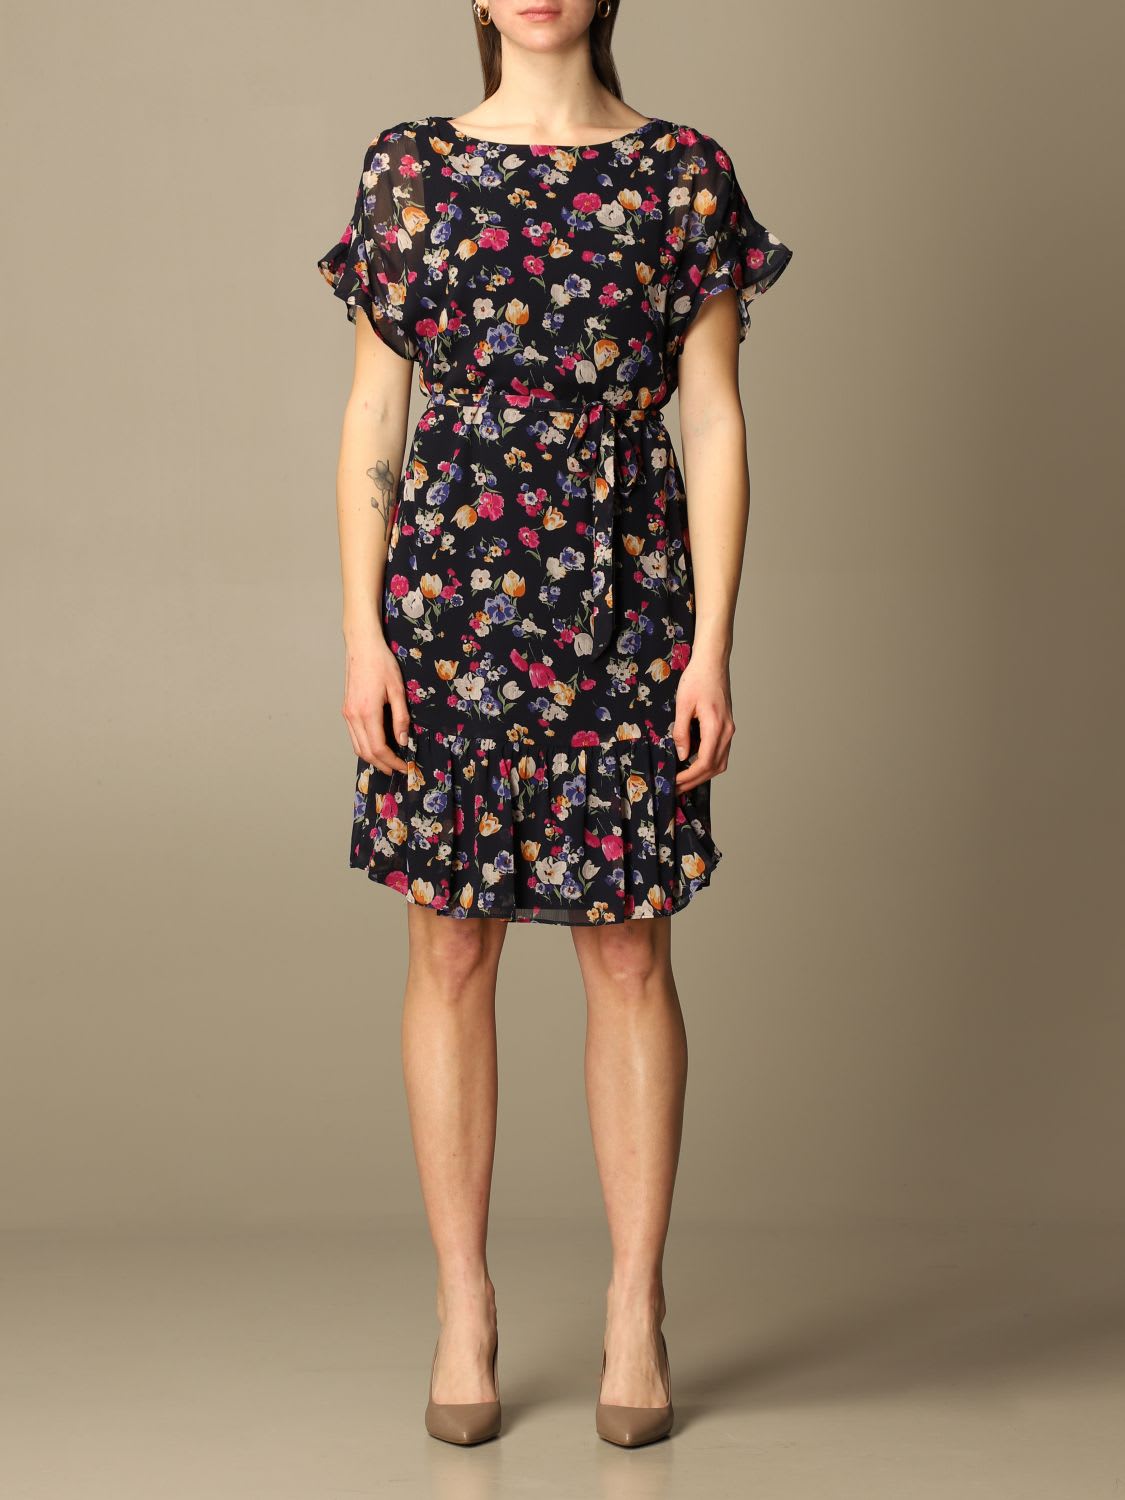 Lauren Ralph Lauren Dress Lauren Ralph Lauren Short Dress With Floral Pattern